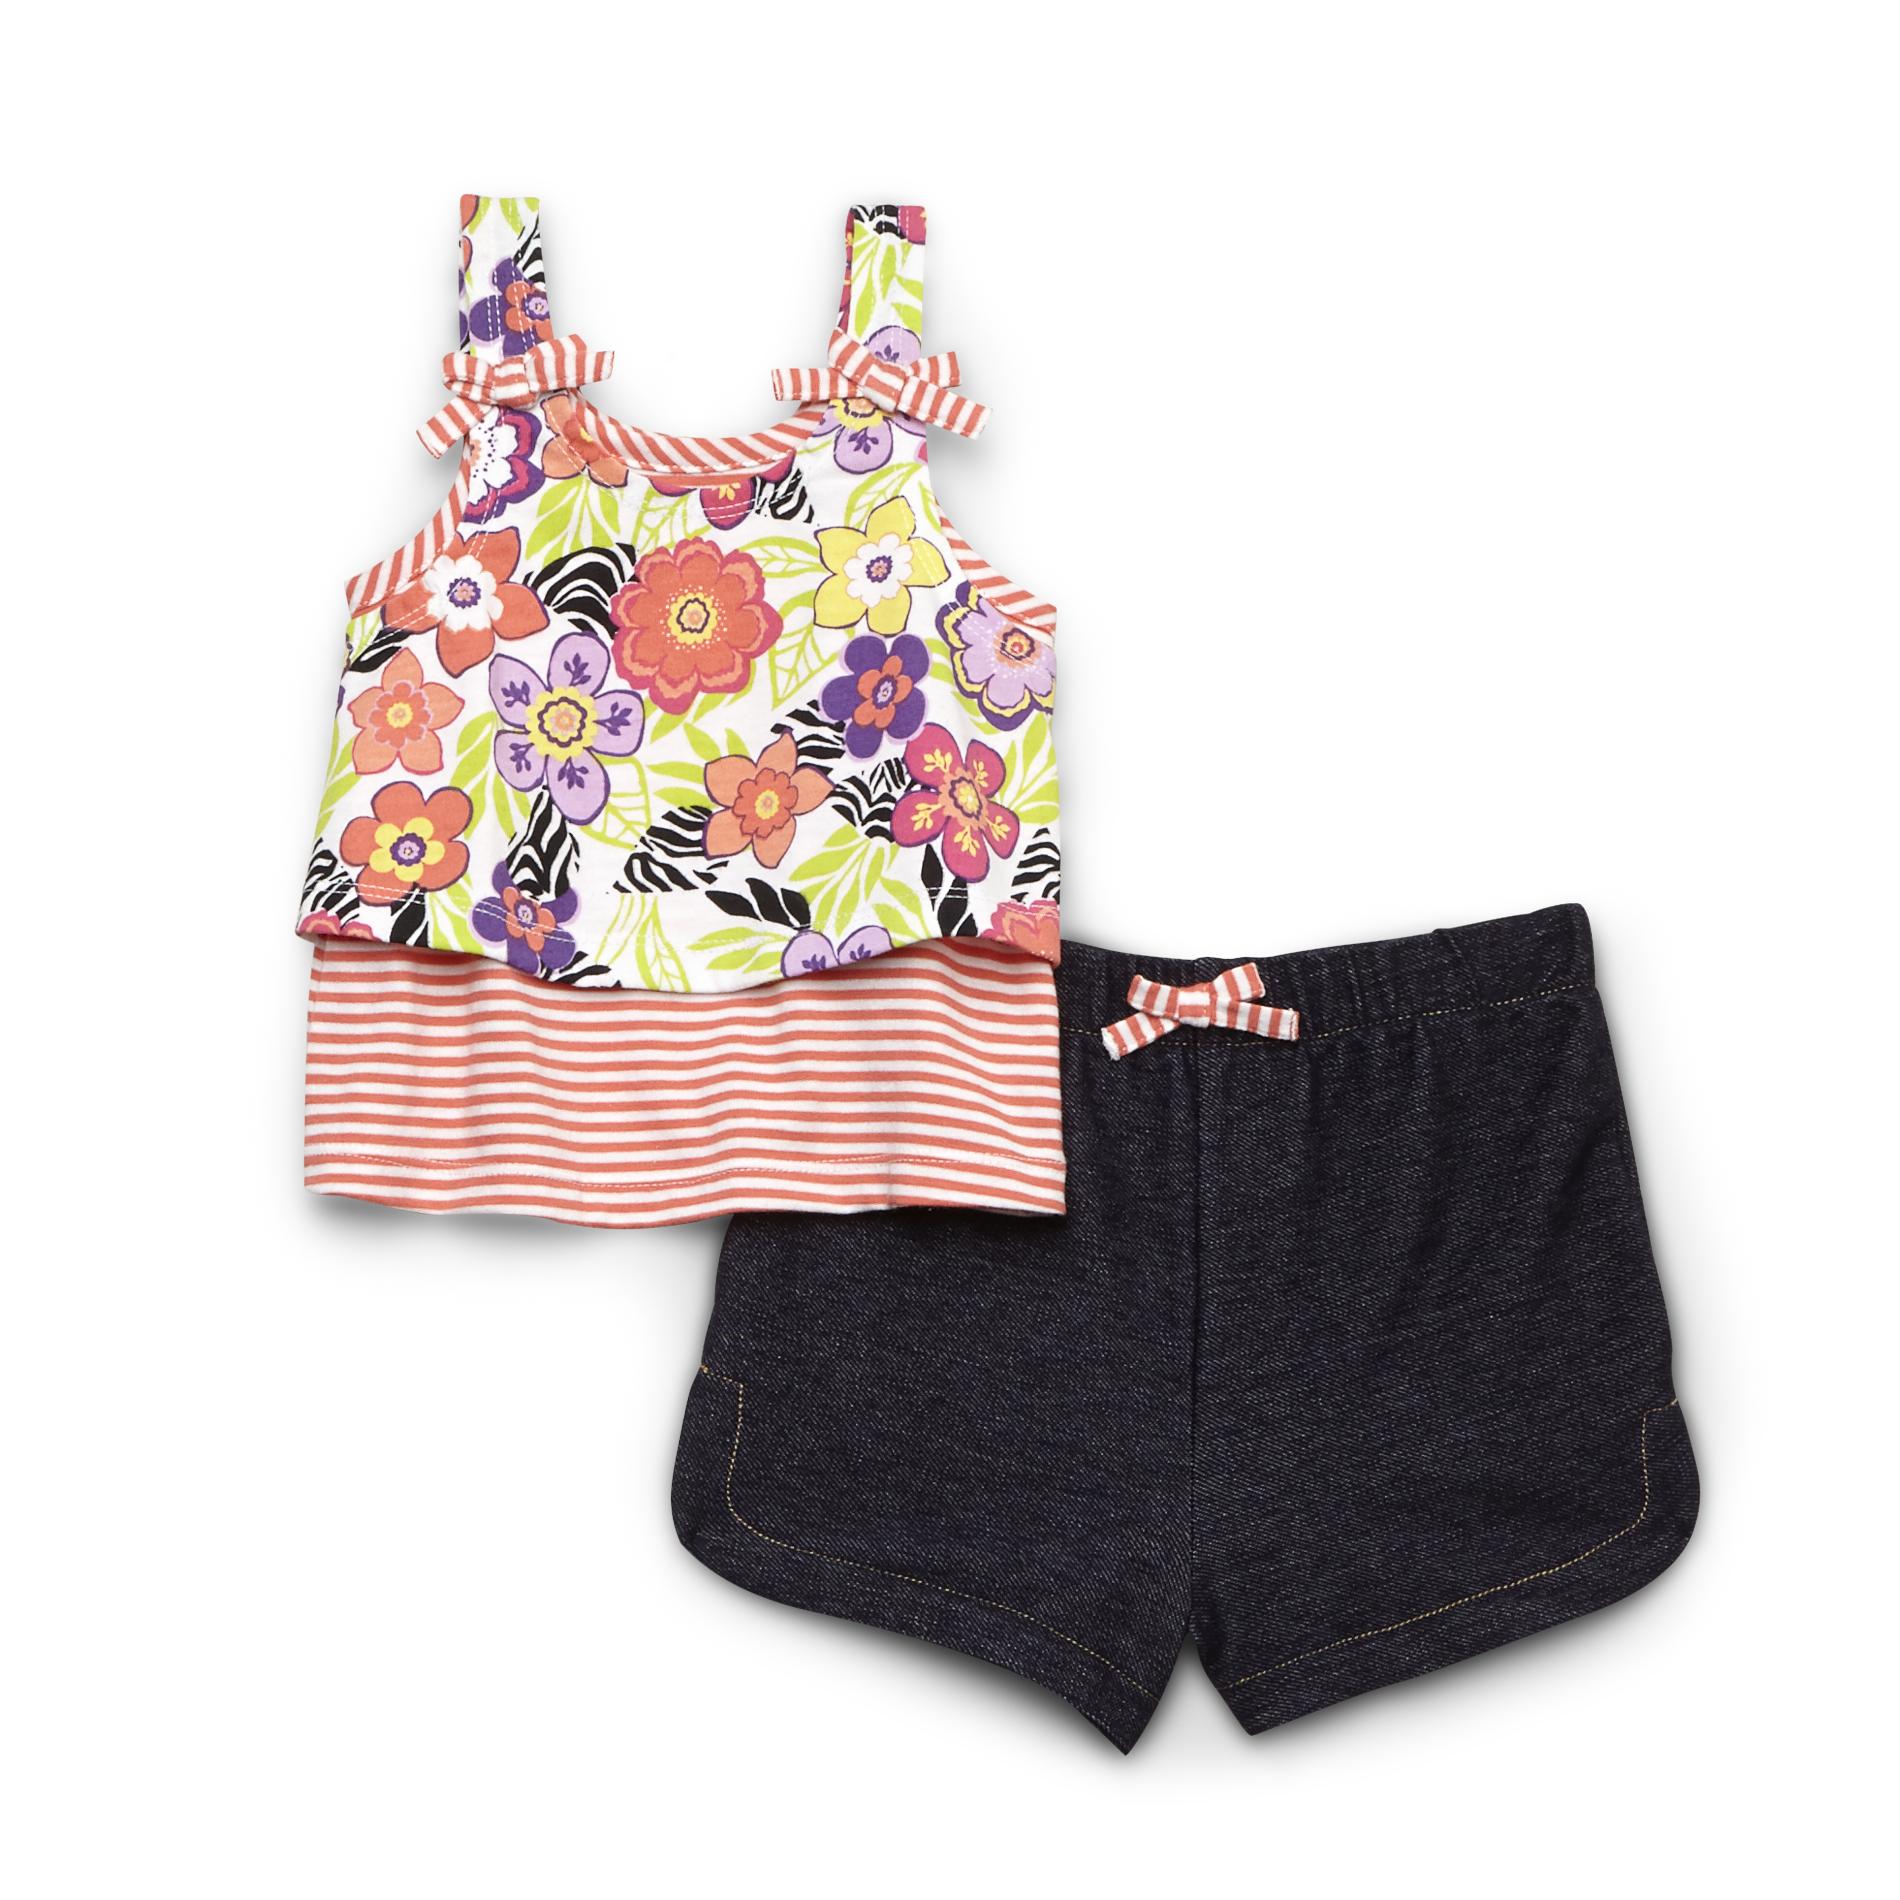 WonderKids Infant & Toddler Girl's Layered Tank Top & Shorts - Floral & Striped